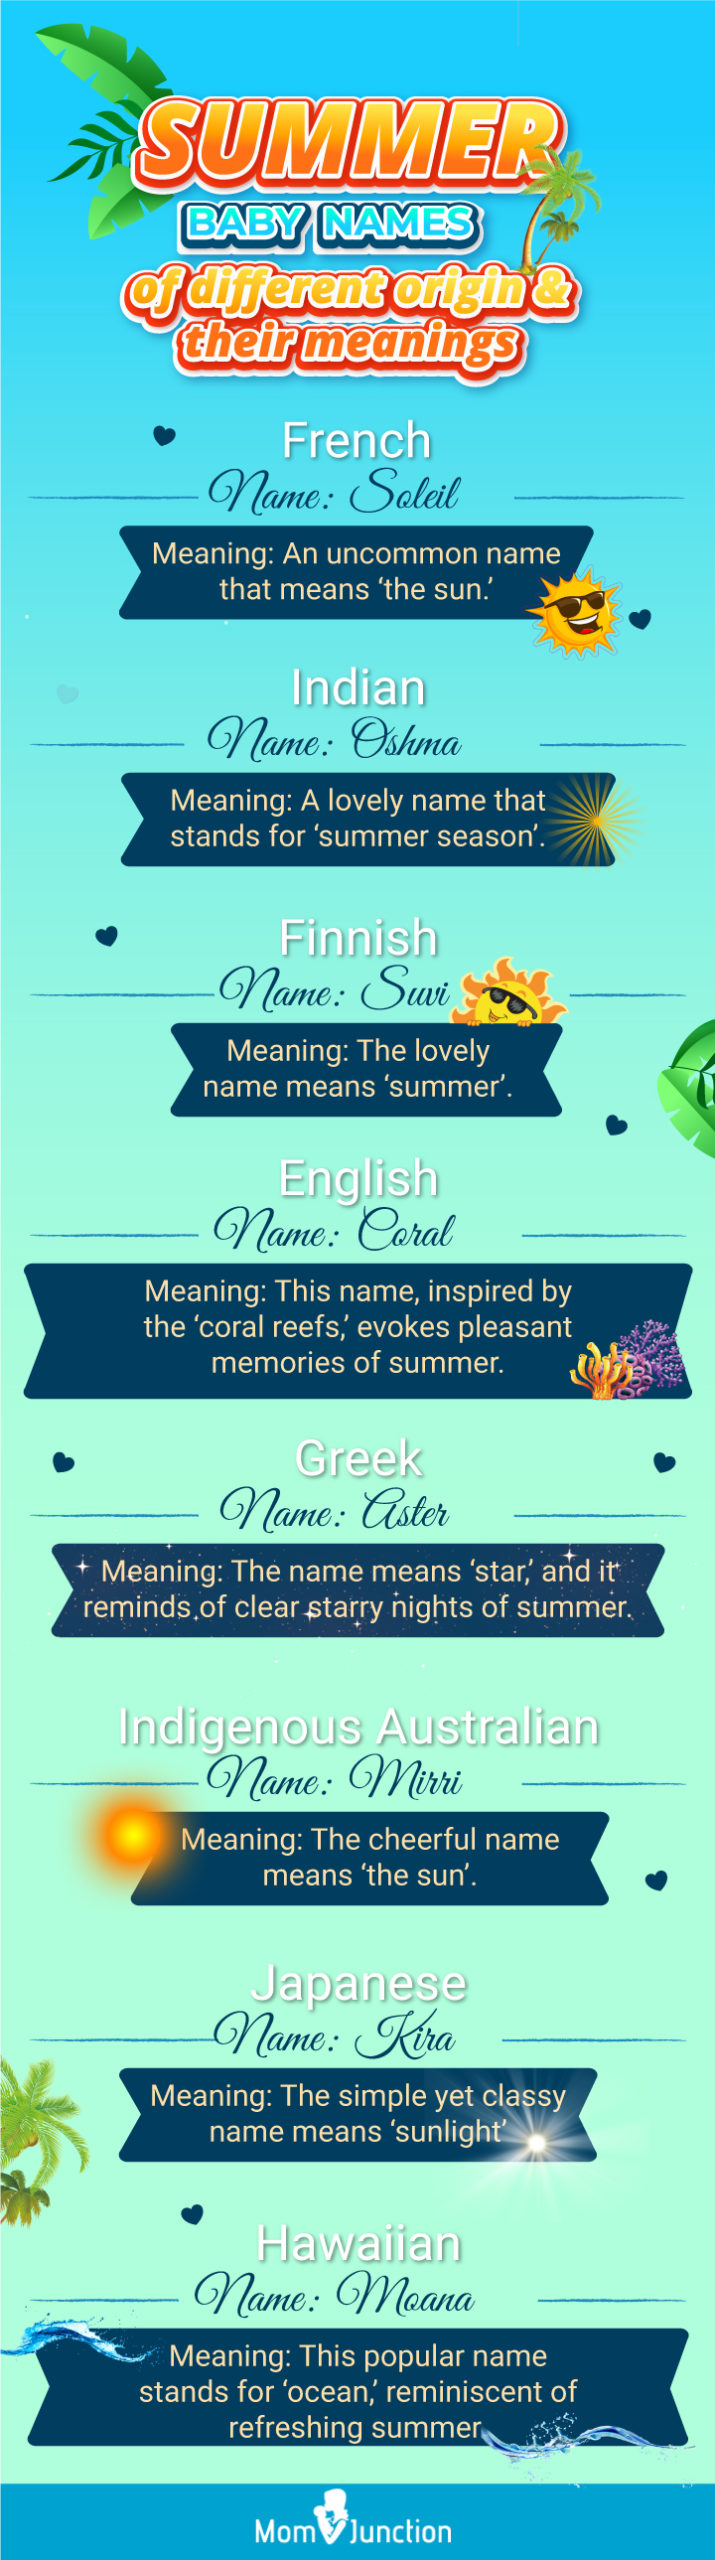 summer baby names of different origin and their meanings [infographic]